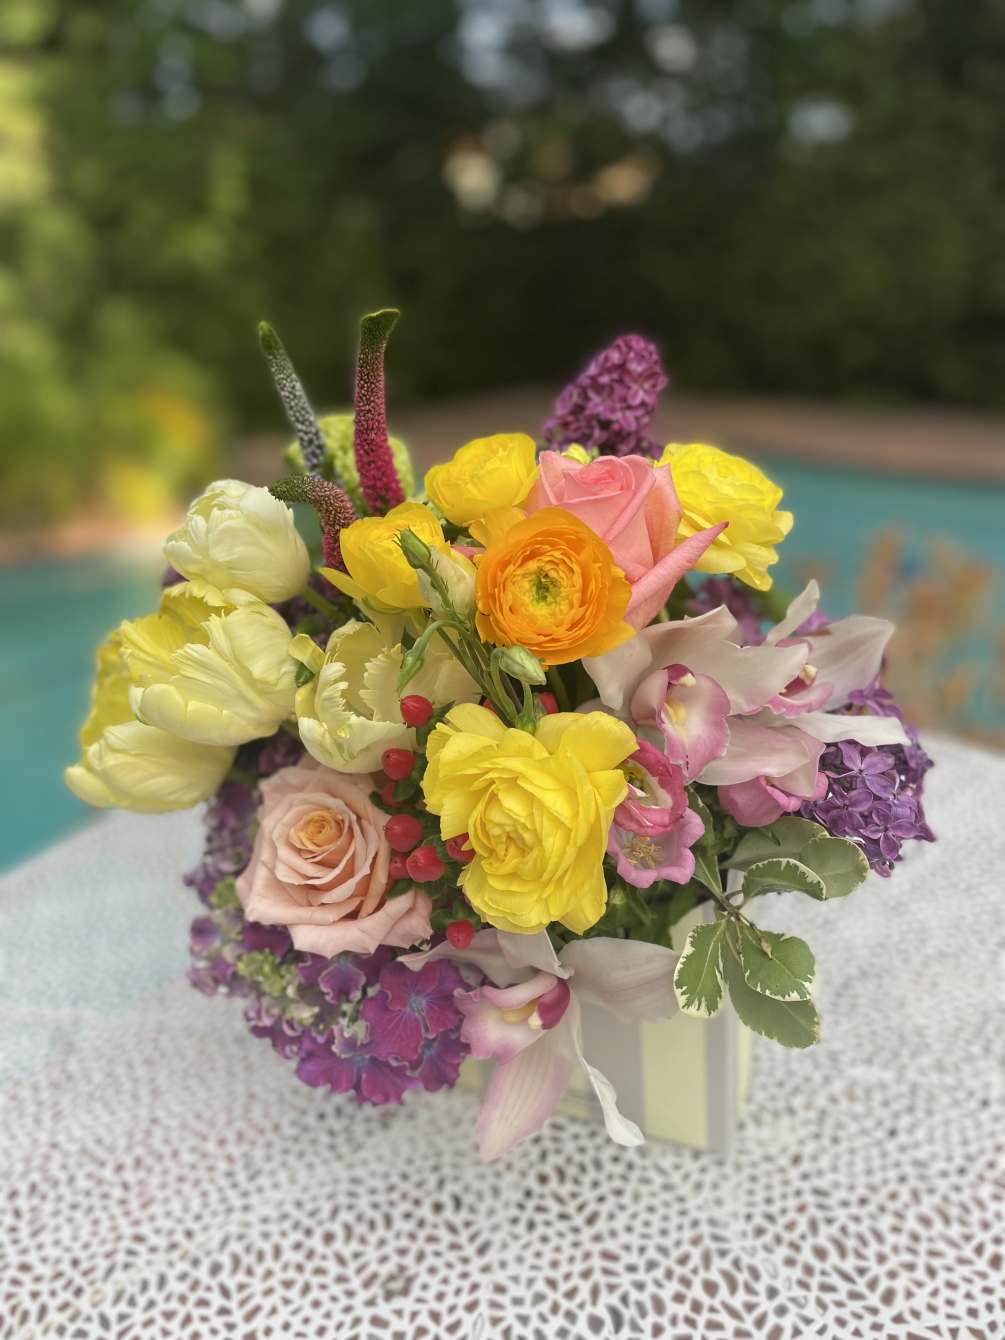 We put together gorgeous arrangements &ldquo;written&rdquo; in the language of flowers.
This Le